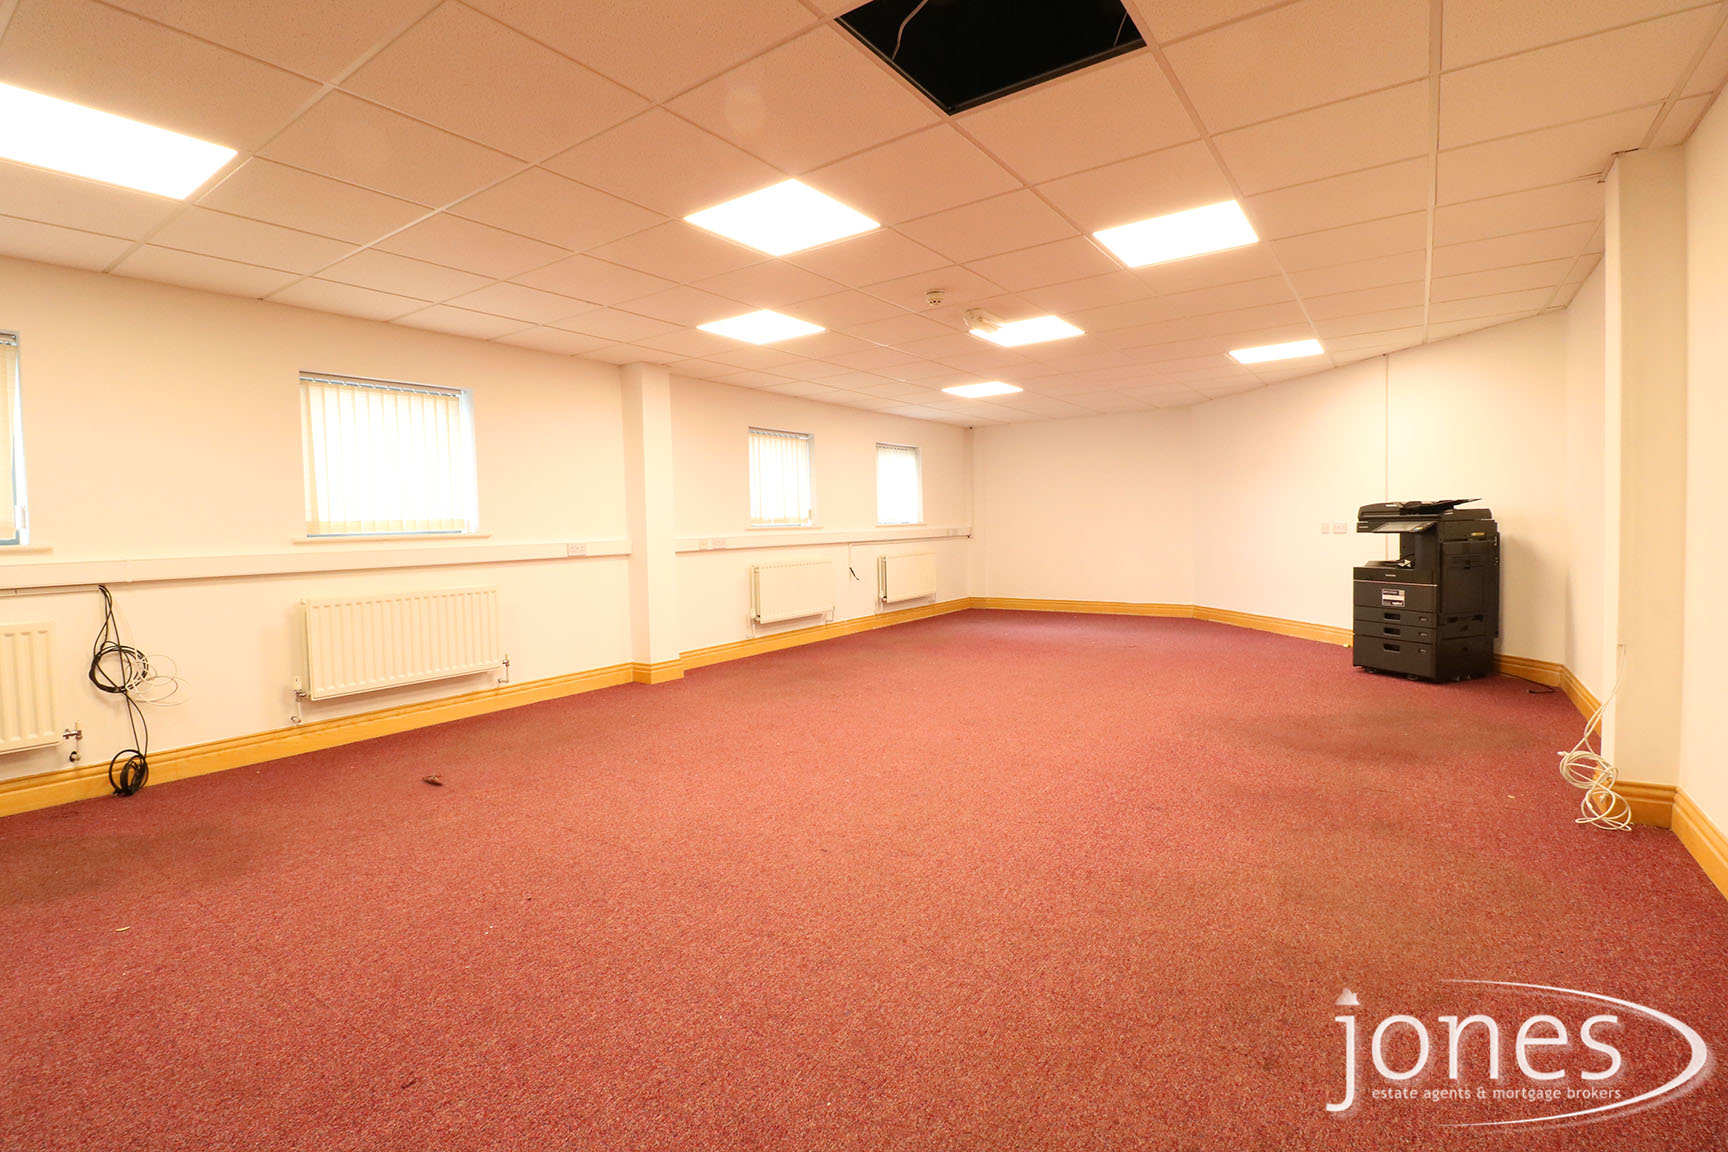 Home for Sale Let - Photo 07 Durham Tees Valley Business Centre,Orde Wingate Way,Stockton on Tees, TS19 0GD